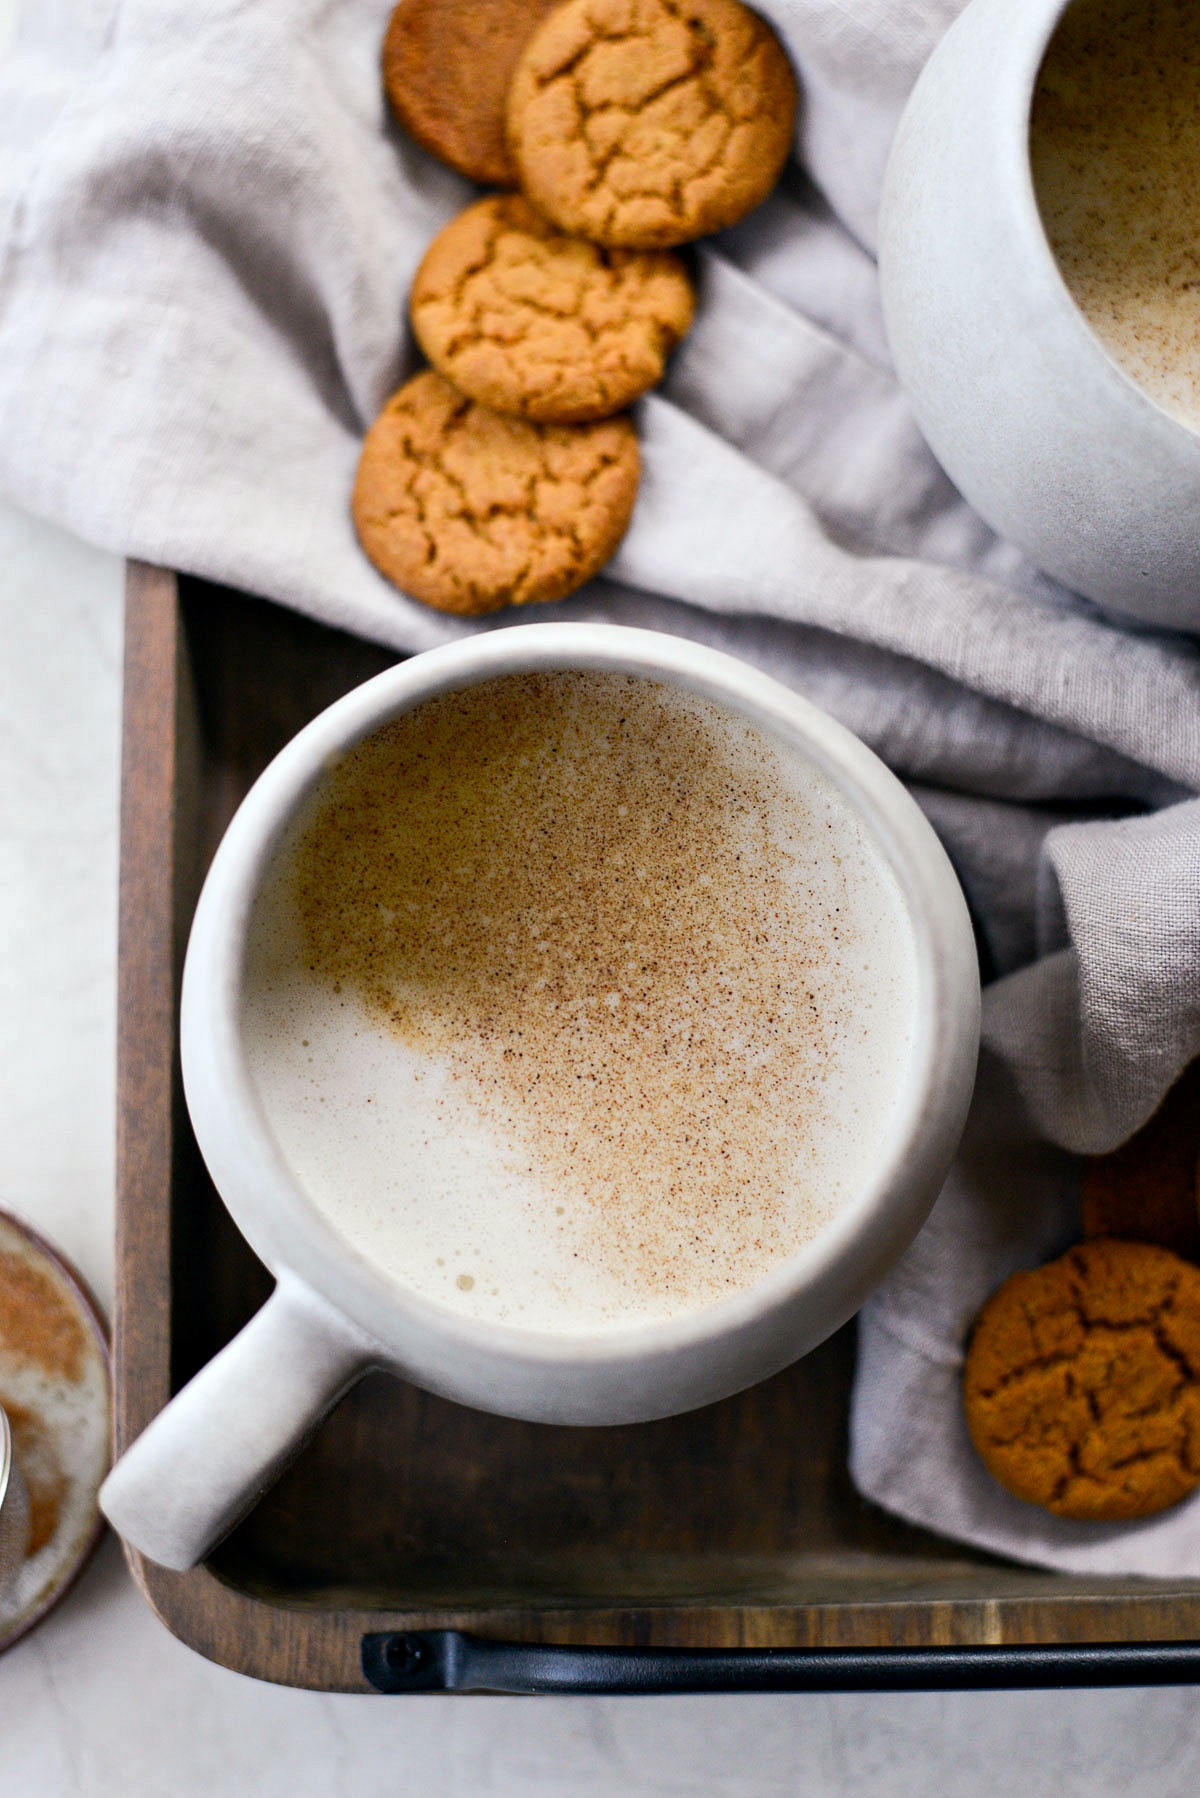 What makes the chai latte such a special drink?